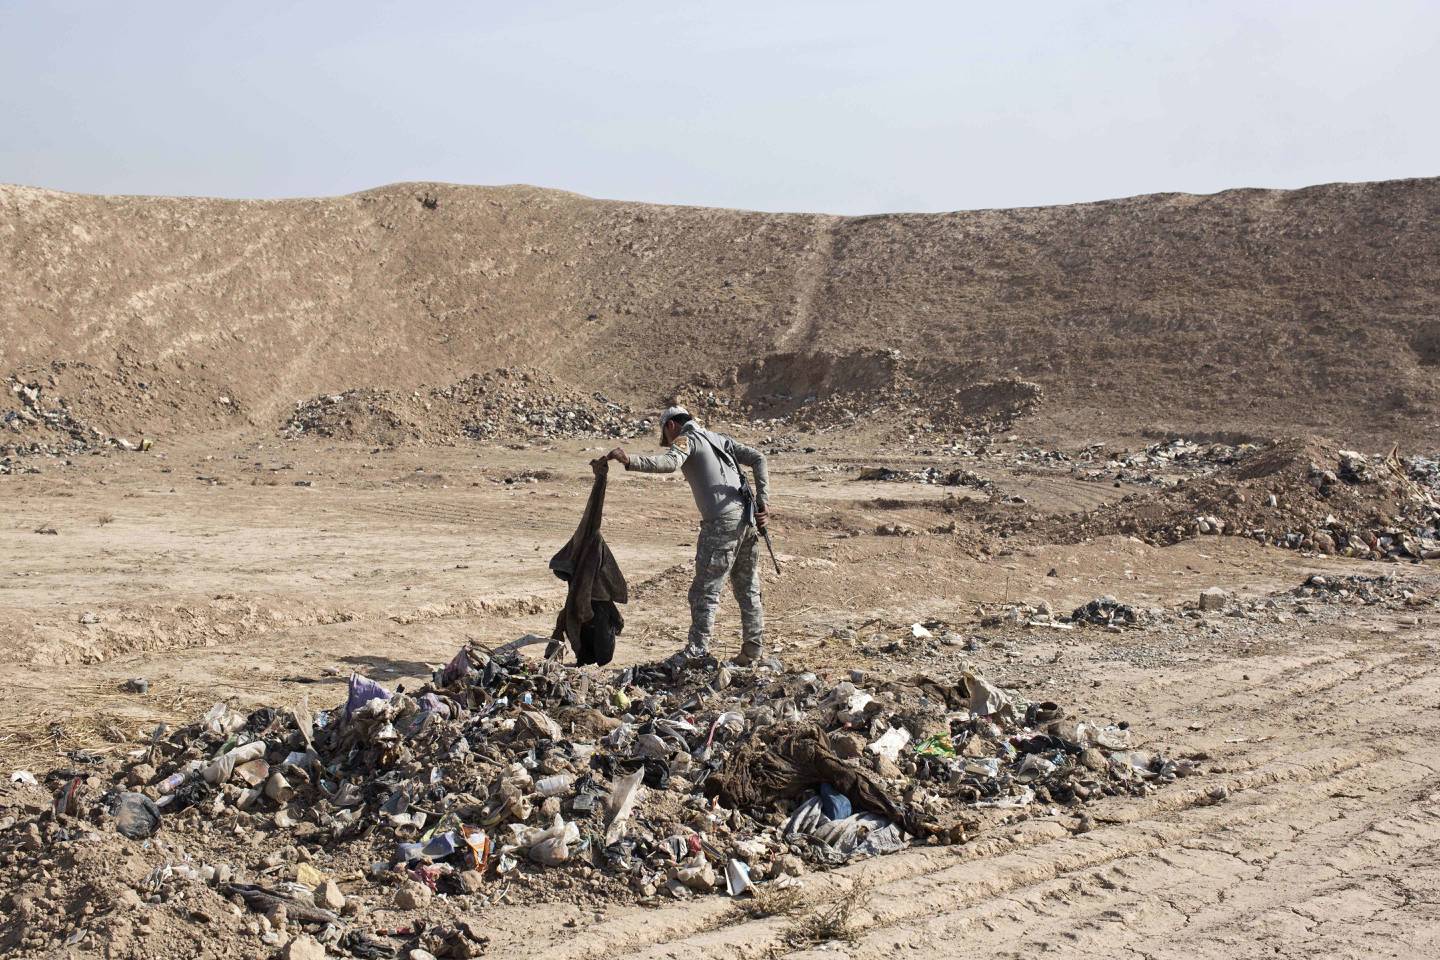 An Iraqi Federal Police officer examines human remains at a site of a mass grave of victims of Islamic State militants in Hamam al-Alil, some 10 kilometers south of Mosul, Iraq, Friday, Nov. 11, 2016. Iraqi troops inched ahead in their battle to retake the northern city of Mosul from the Islamic State group on Friday, as the U.N. revealed fresh evidence that the extremists have used chemical weapons. (AP Photo/Marko Drobnjakovic)